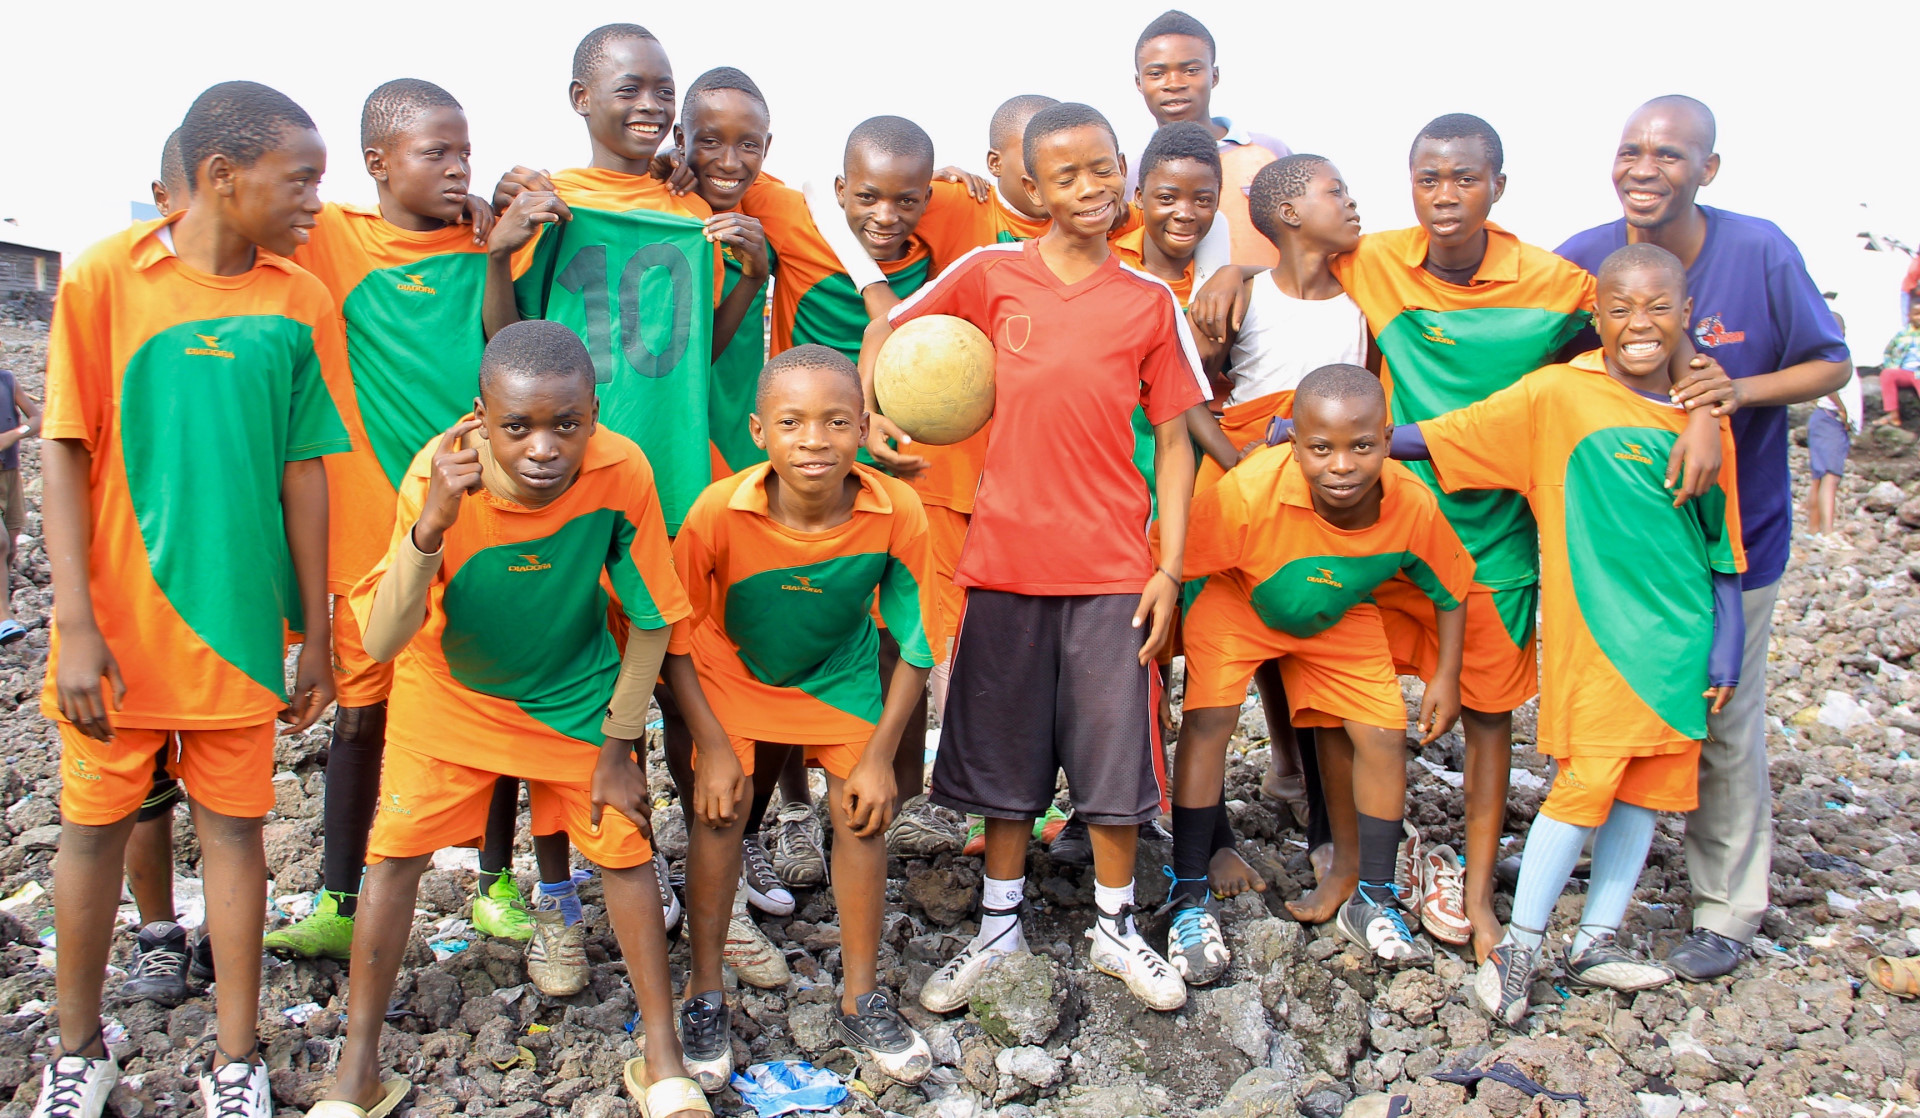 “I now realise just how powerful sport can be to reach and help people.”*Pastor Ruboneka, DRC